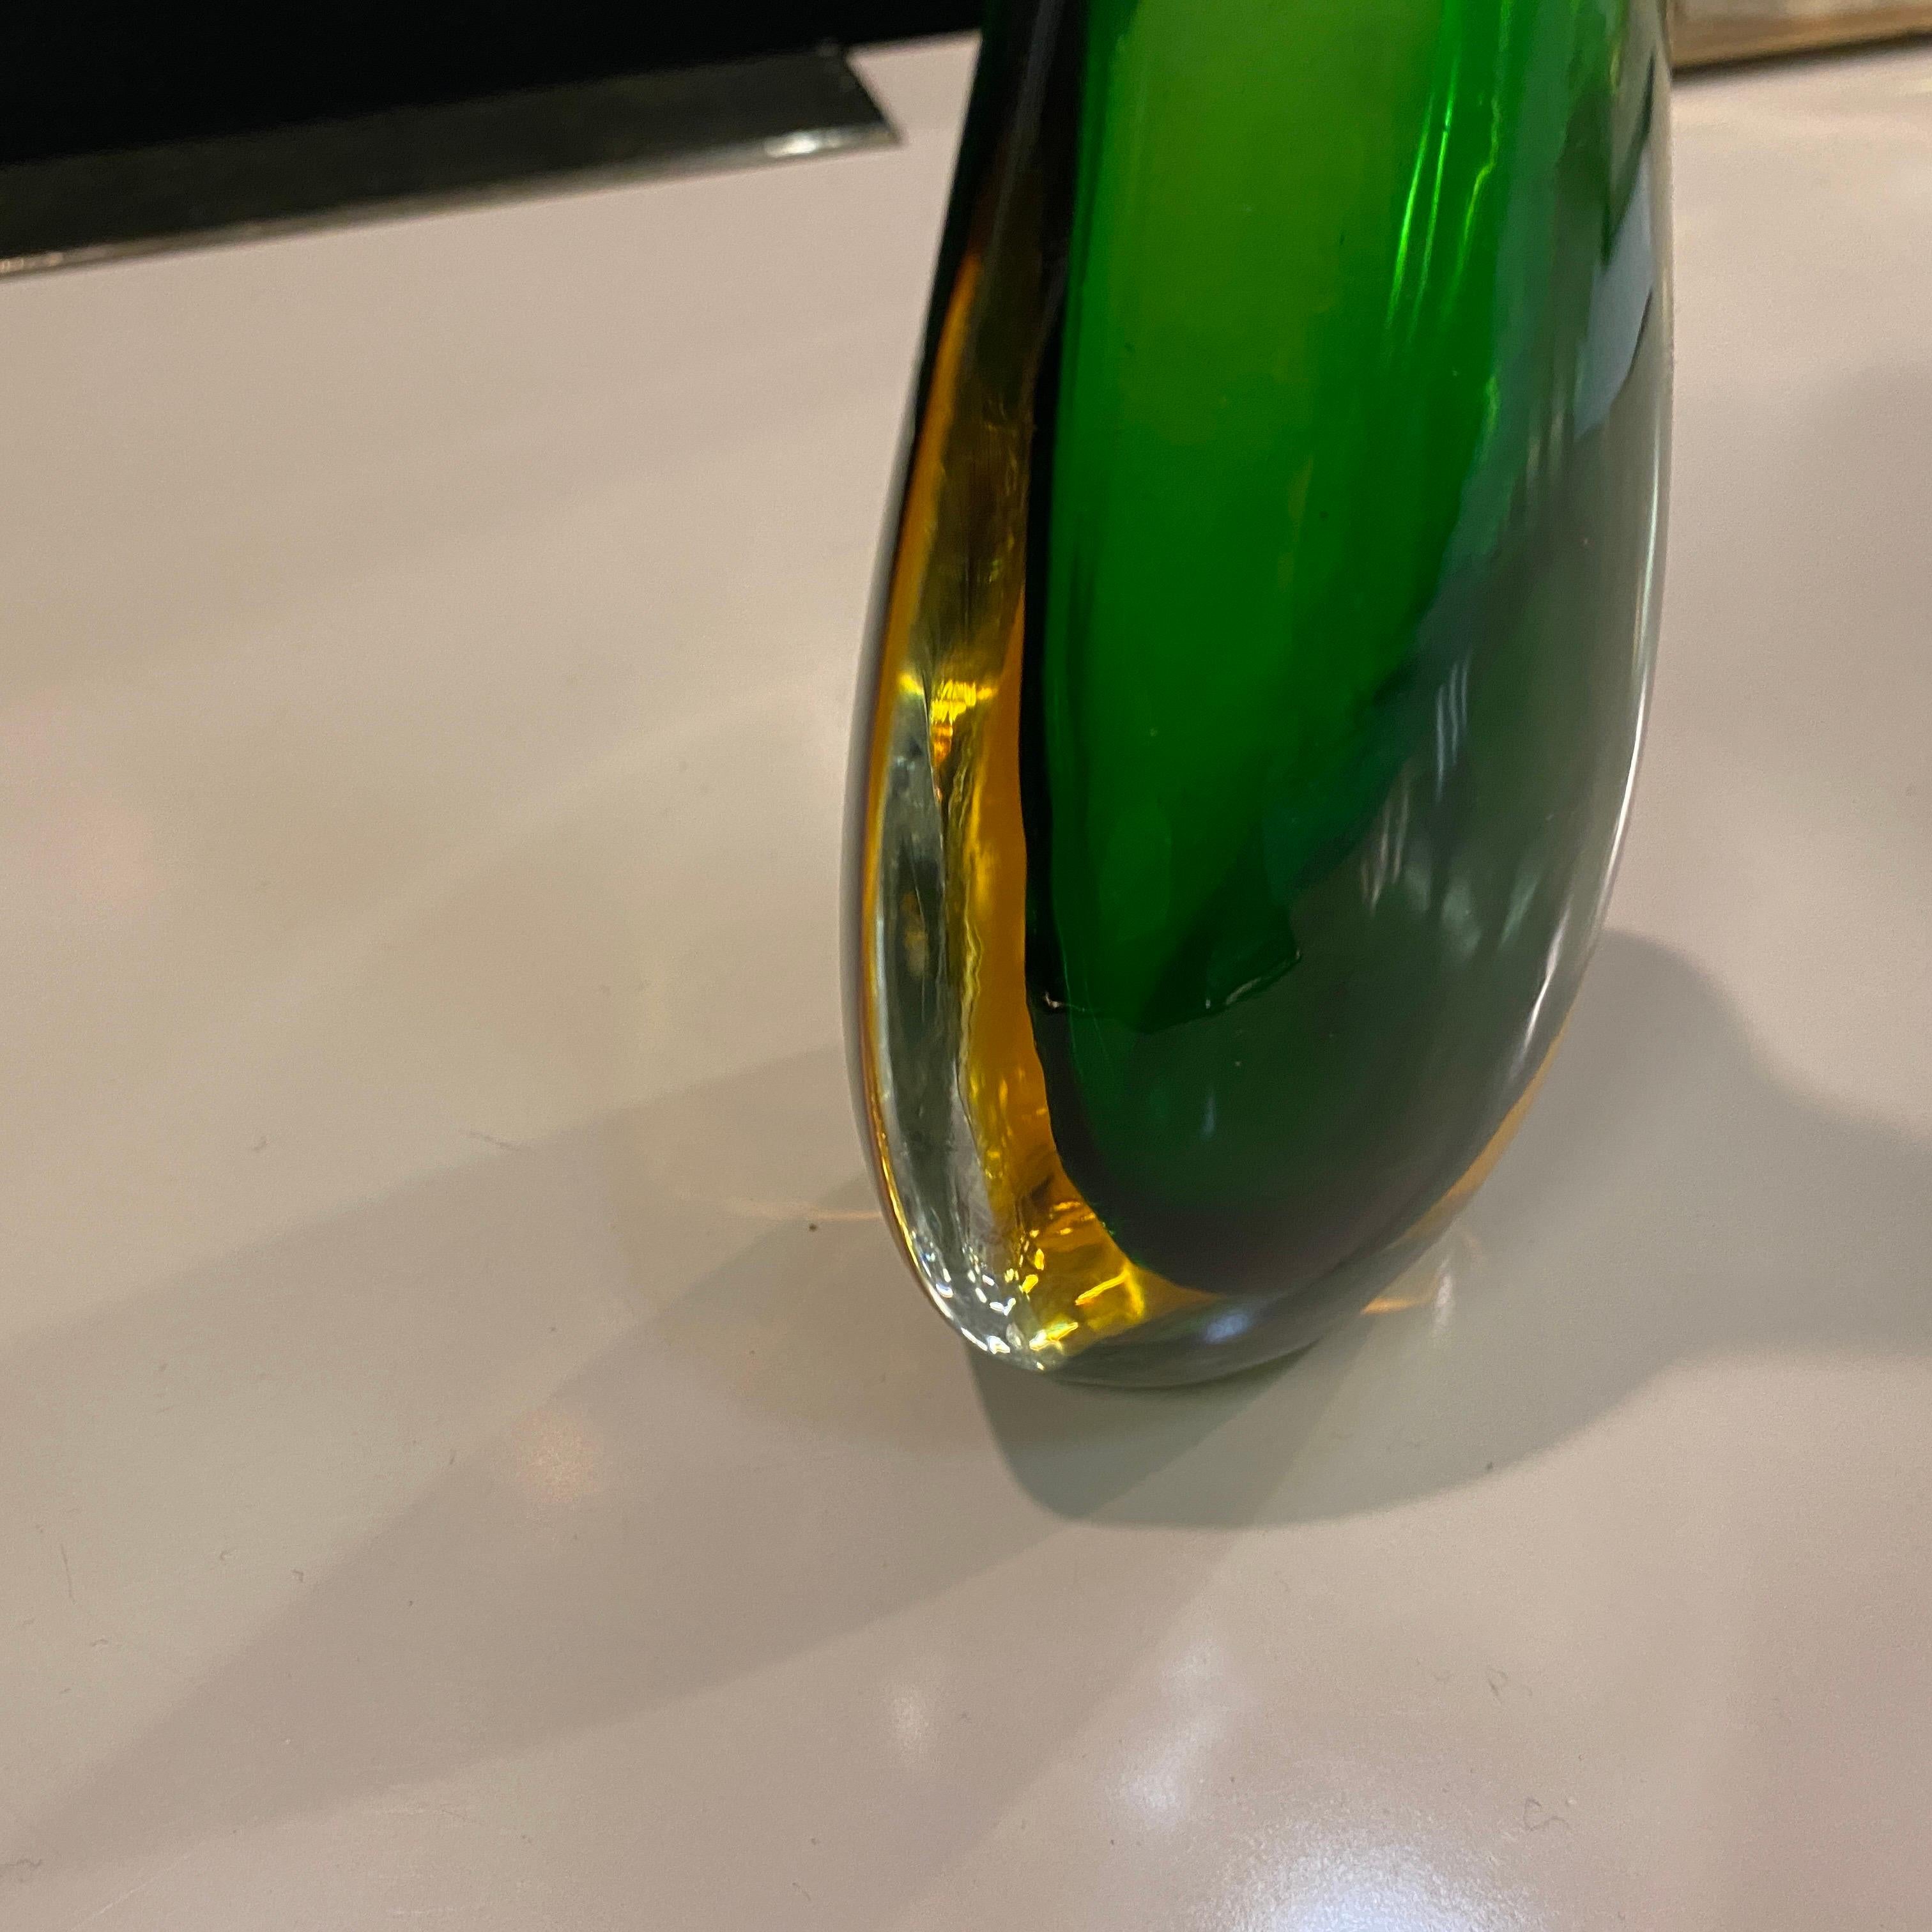 Hand-Crafted 1970s Flavio Poli Style Modernist Green and Yellow Murano Glass Vase